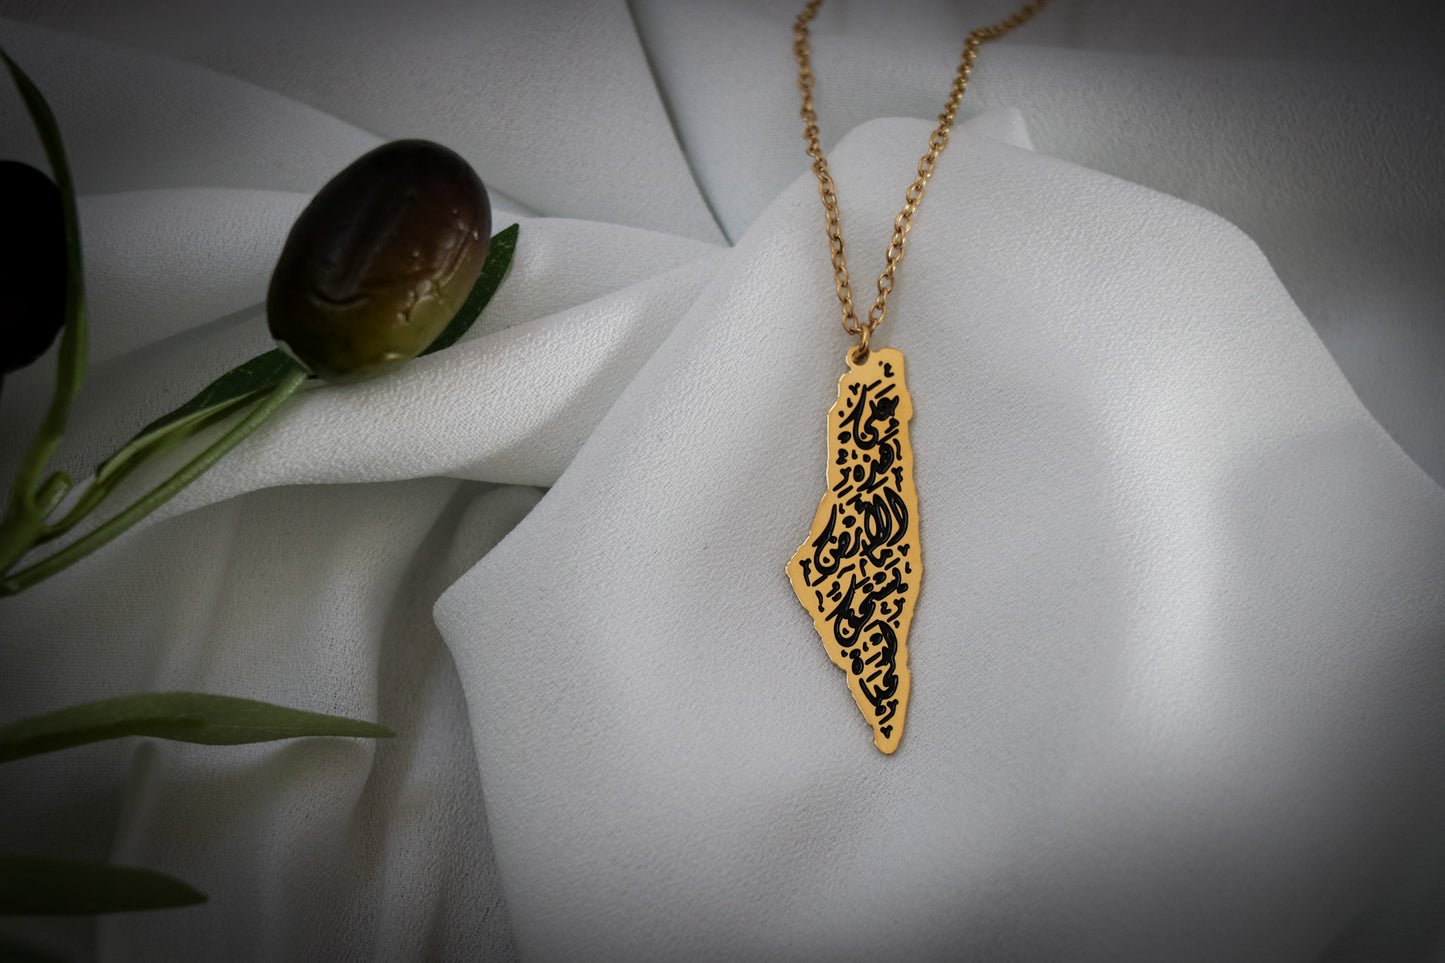 Country Map Necklace in Black Touch Written on it (On this earth there is that which deserves life) written In Arabic Calligraphy